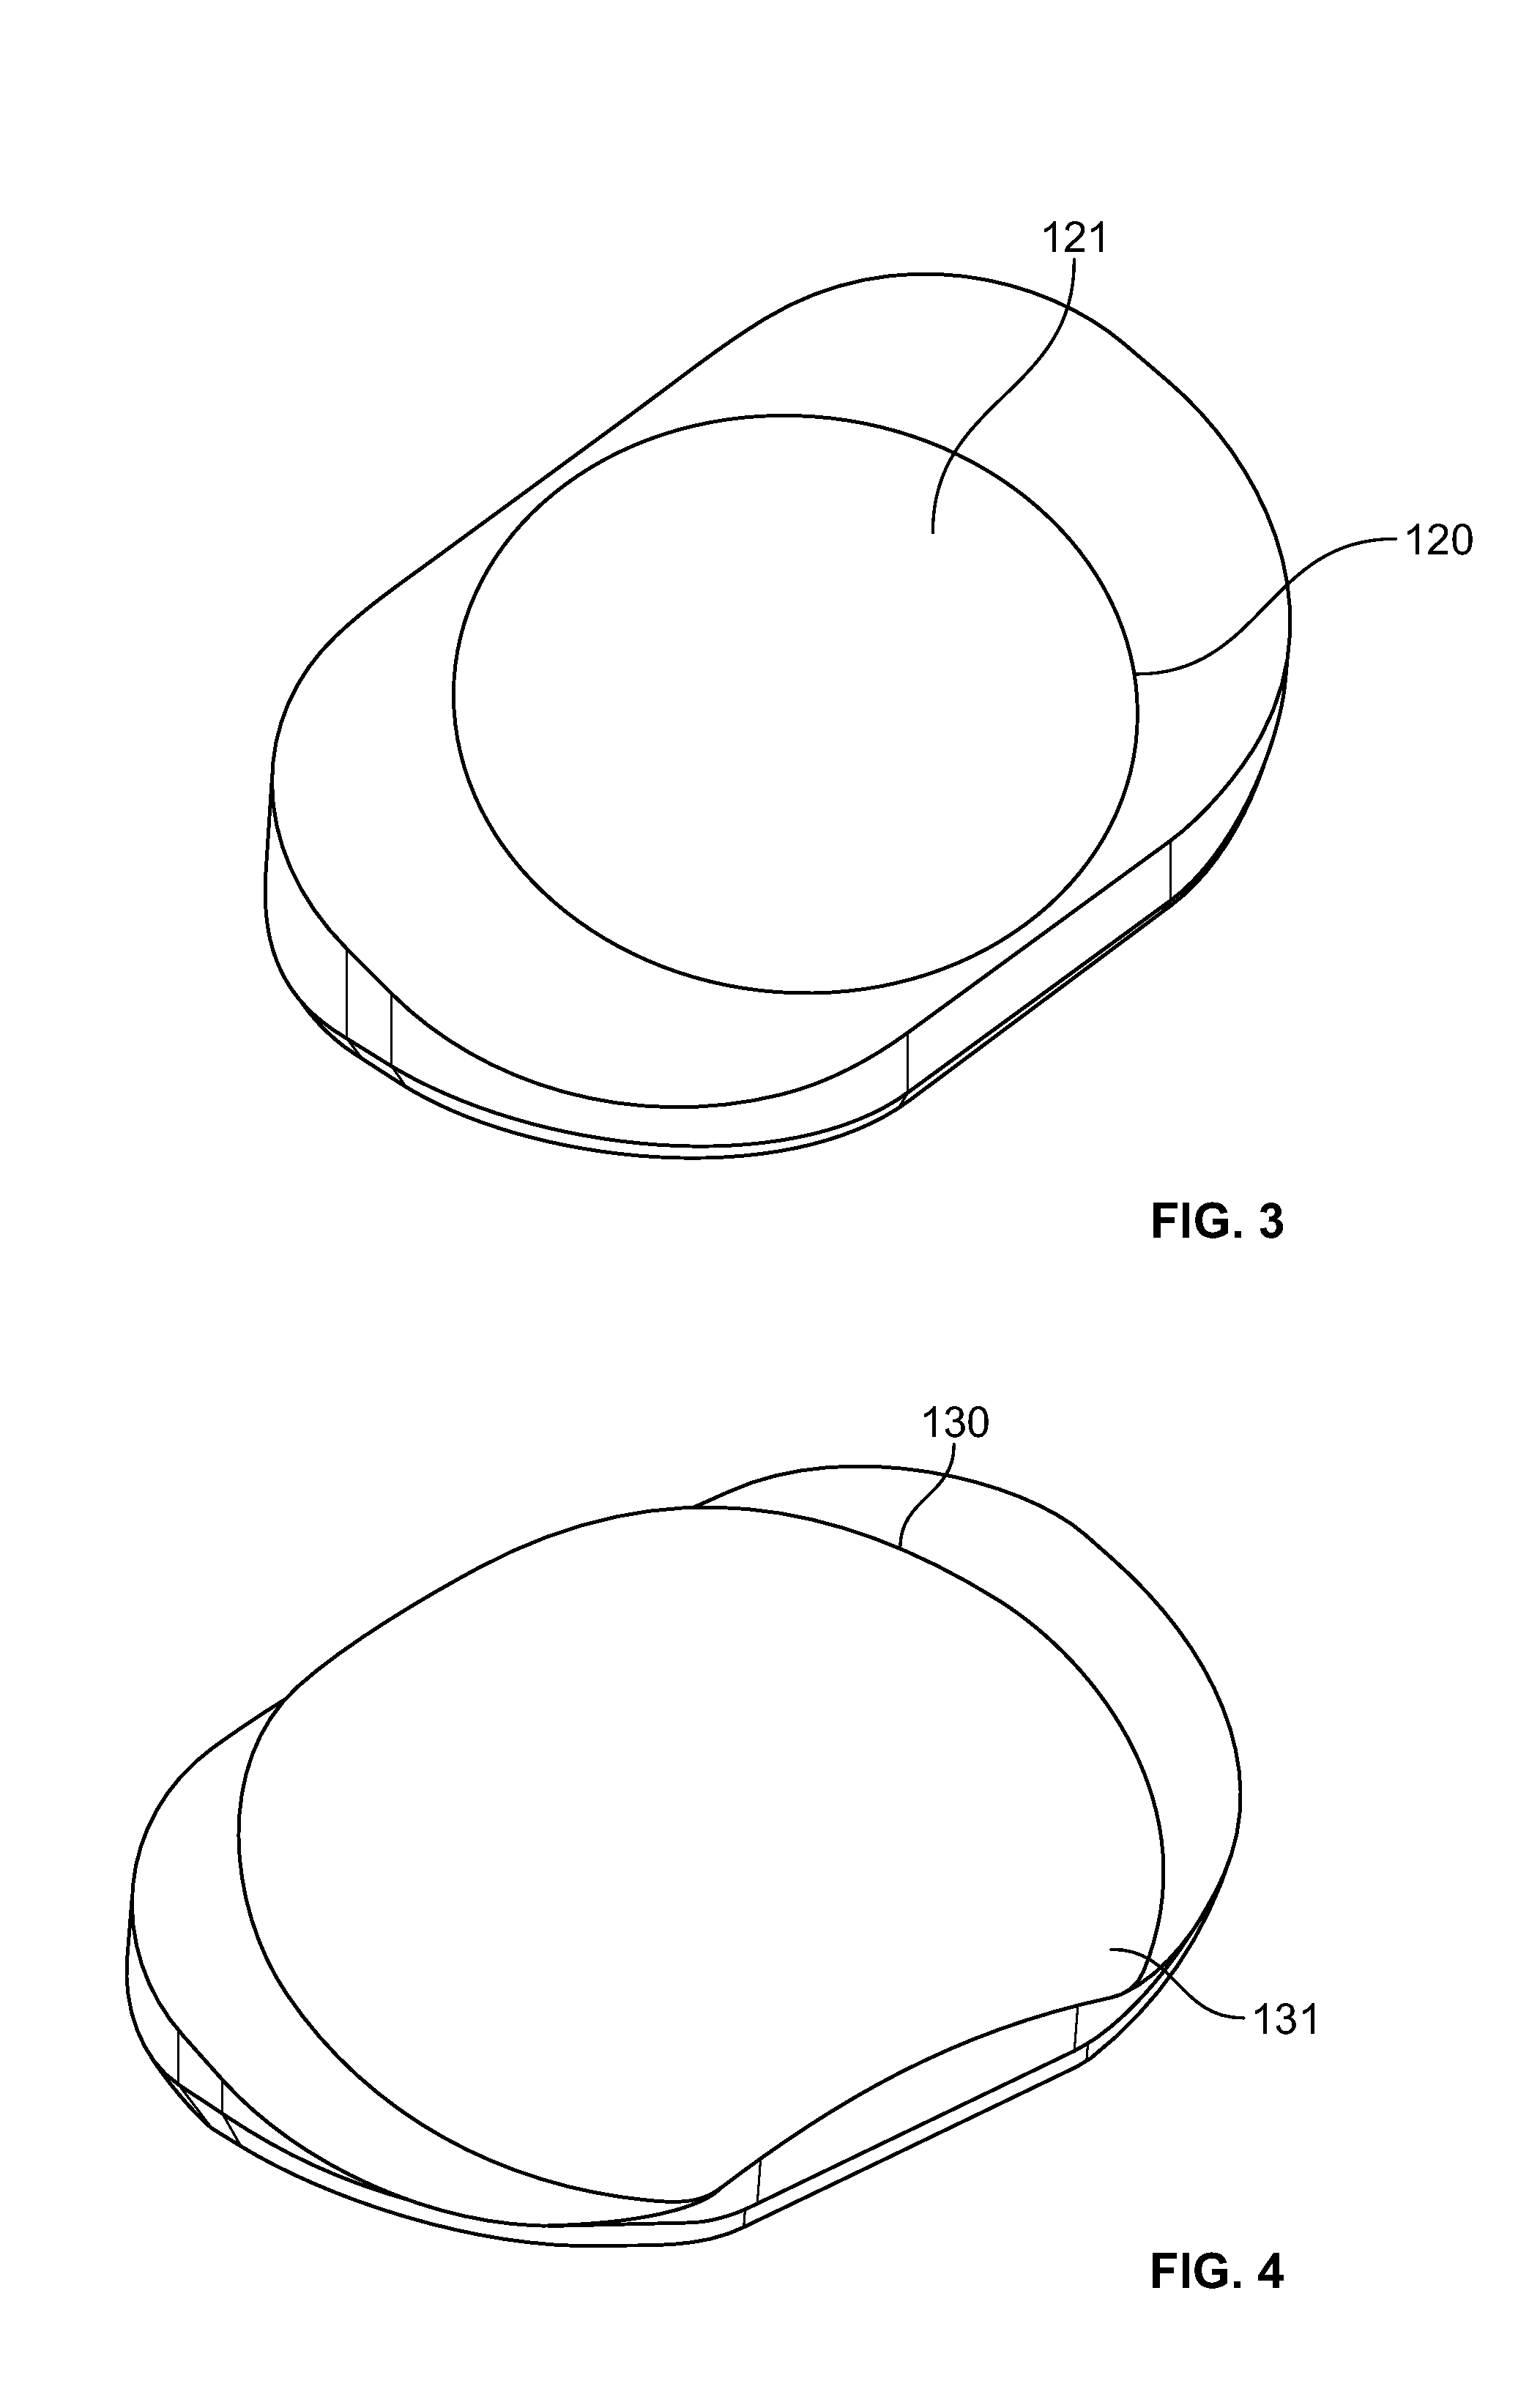 System and Method for Sizing, Inserting and Securing Artificial Disc in Intervertebral Space